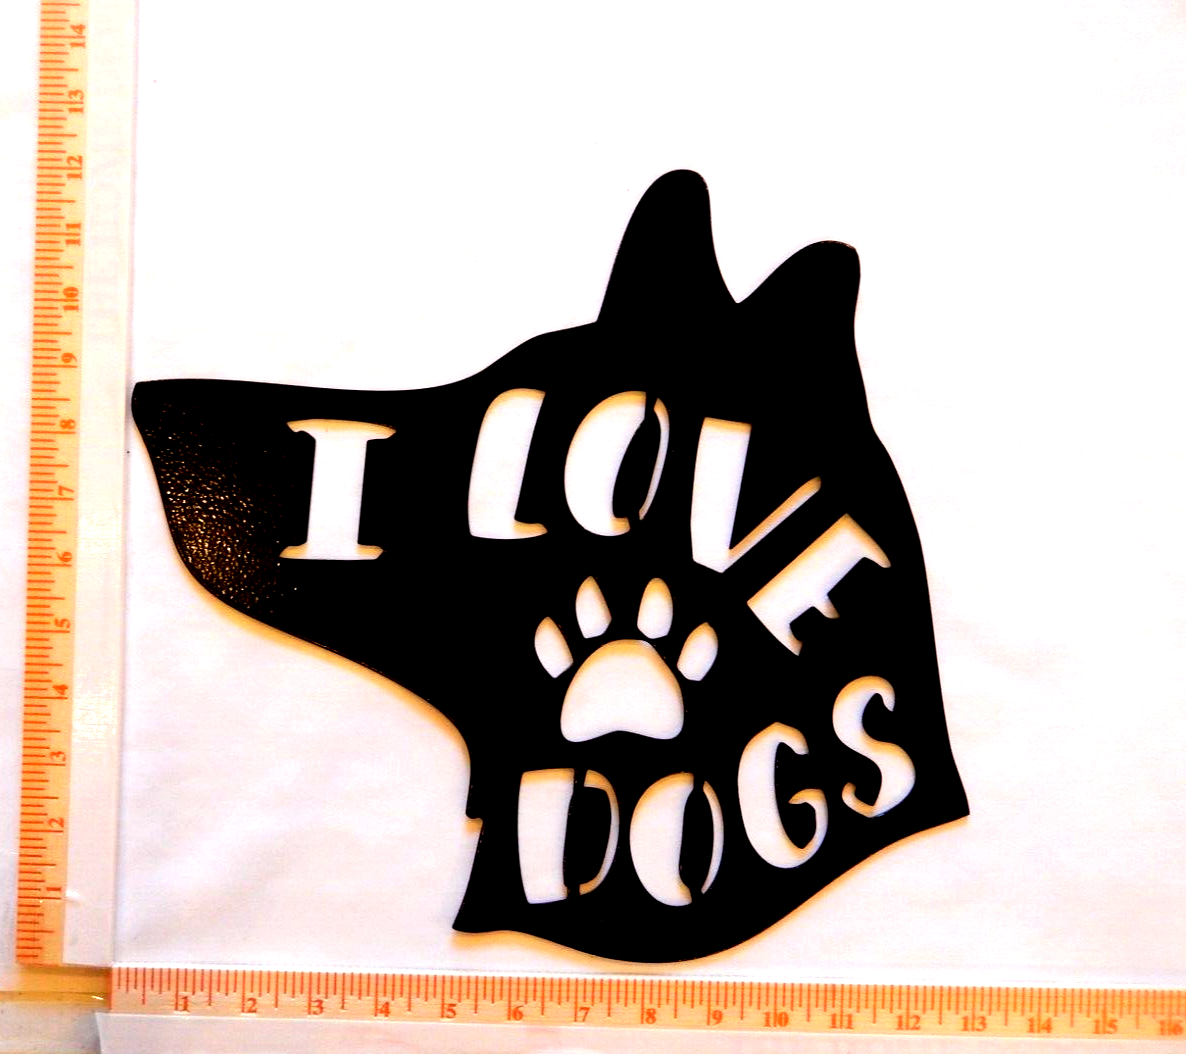 "I LOVE PAW DOGS" 14 gauge thick Black Painted  Metal Wall Art 12" x 12"